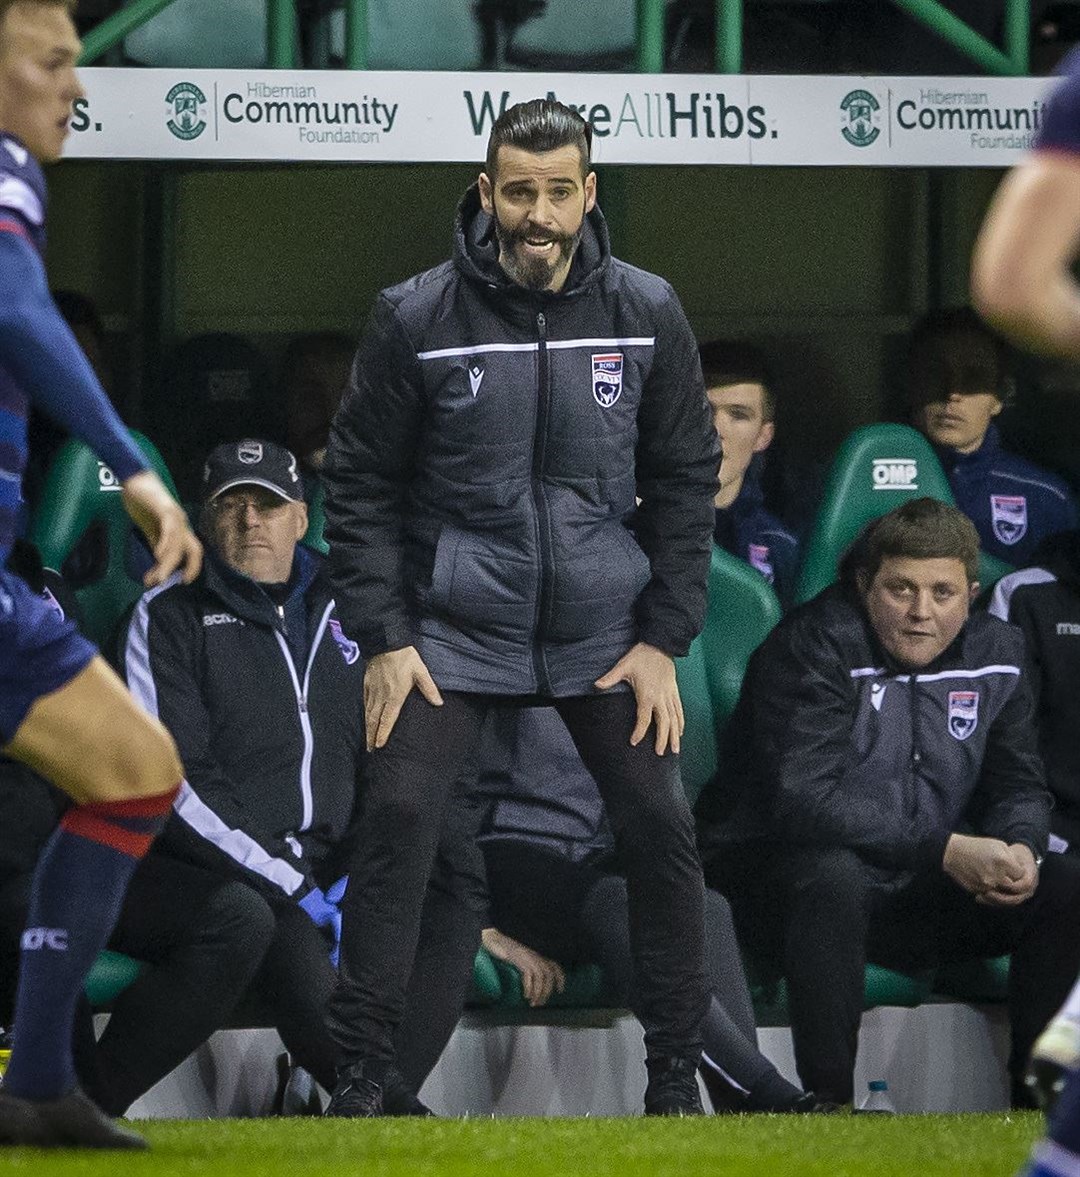 Ross County co-manager Stuart Kettlewell wants to see his side doing the basics right again after losing to Hibernian on Wednesday. Picture: Andy Barr